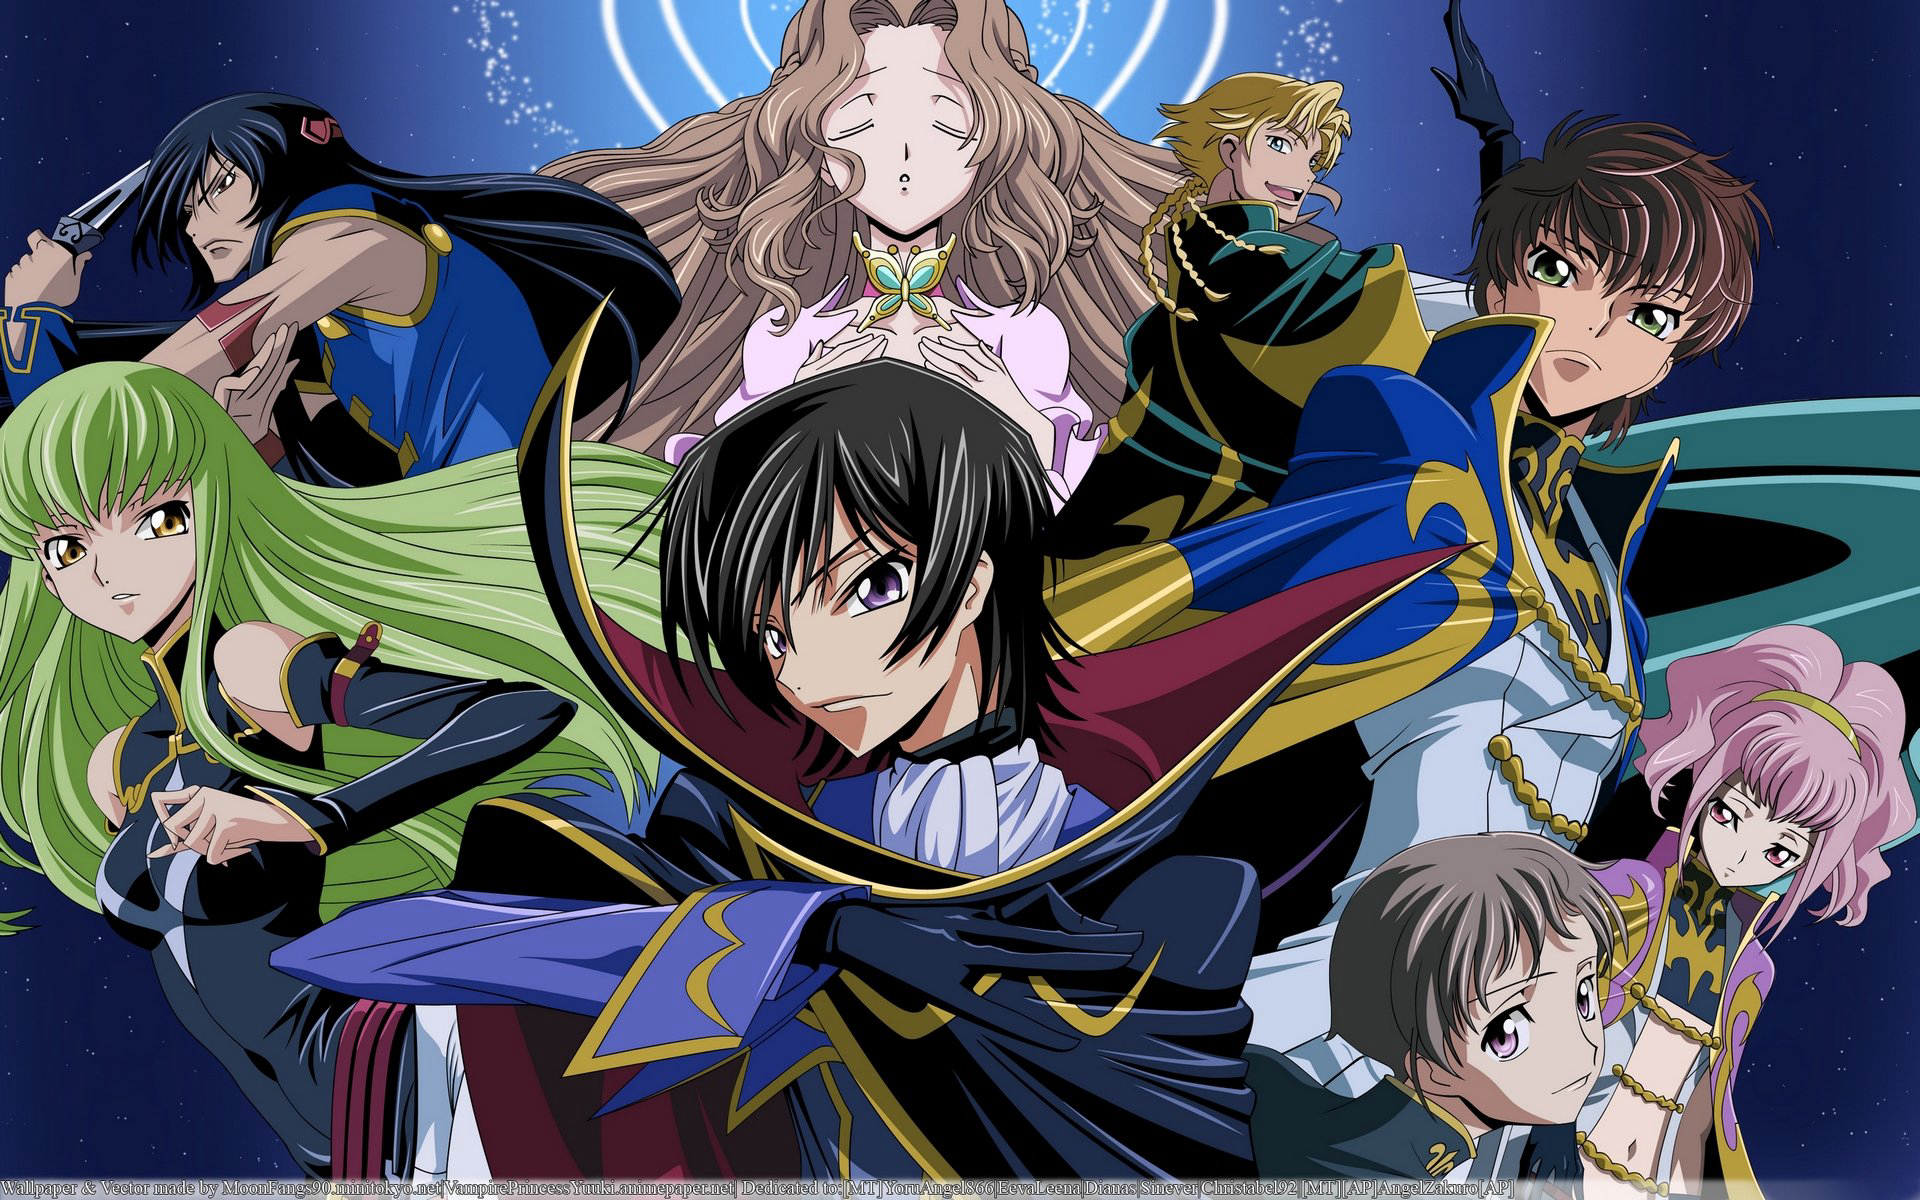 Code Geass: Lelouch of the Rebellion - Rebellion - Con đường tạo phản - Bstation Tập 1 (2018)